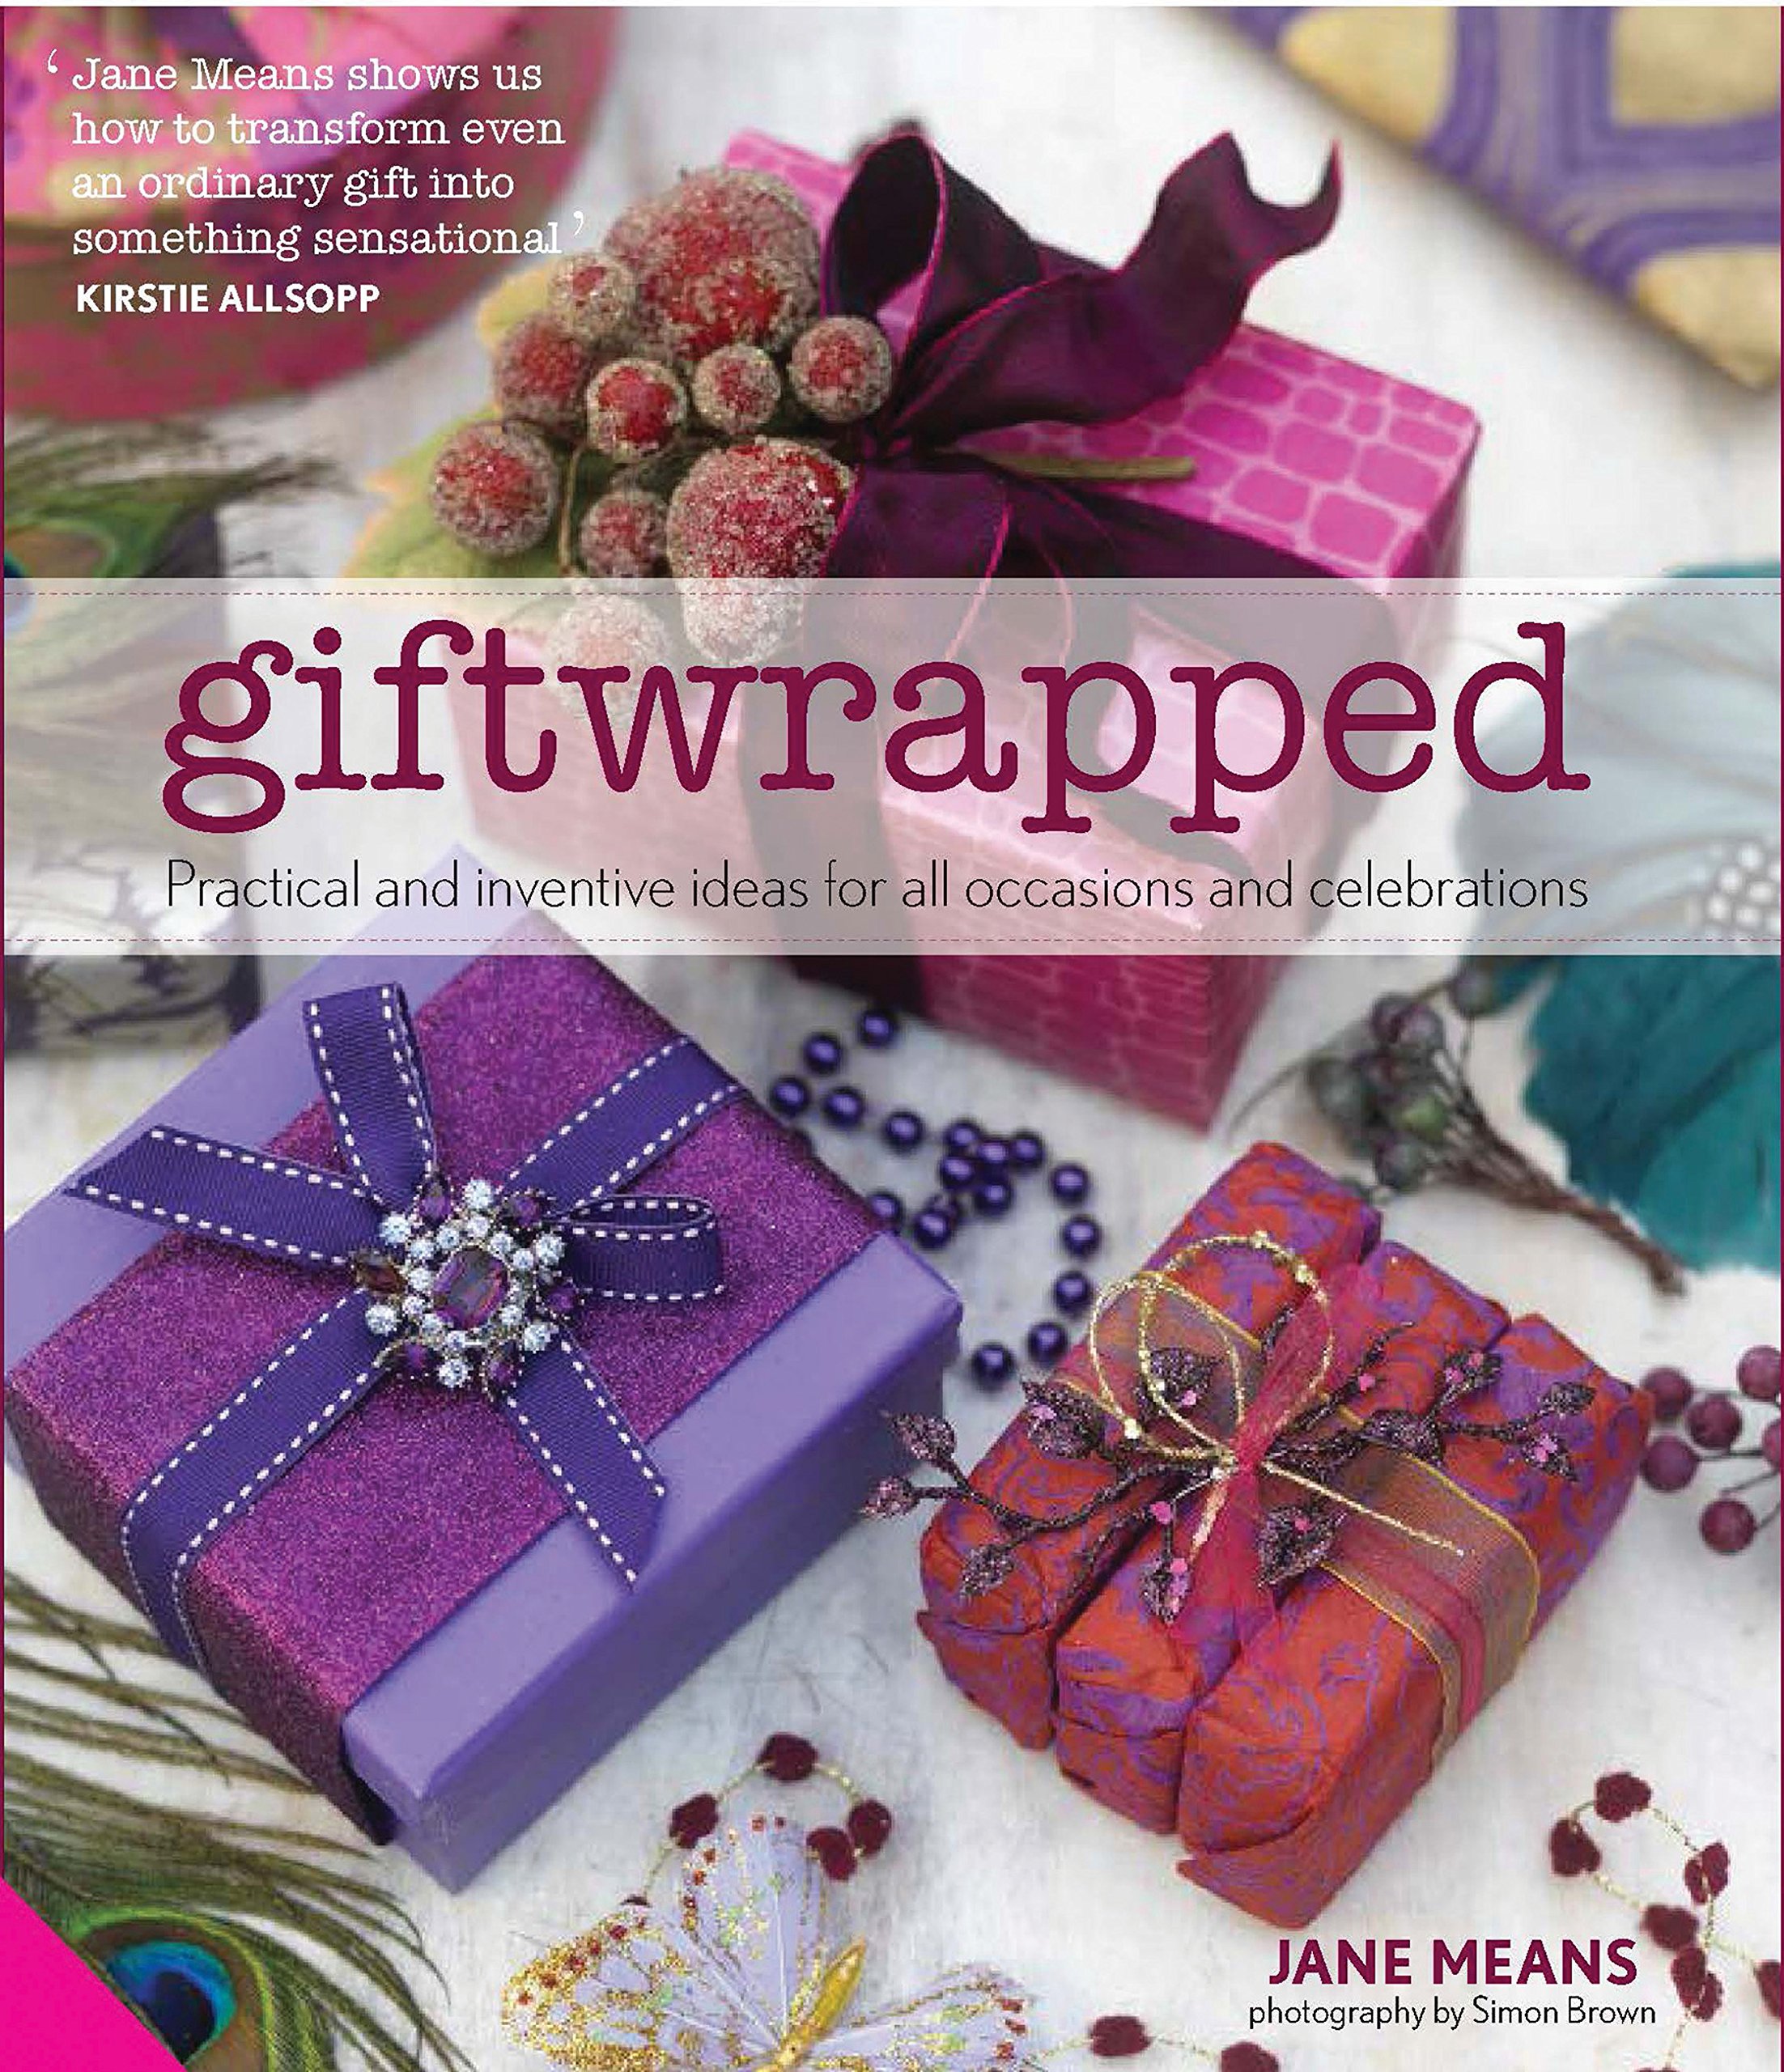 Giftwrapped: Practical and Inventive Ideas for All Occasions and Celebrations - Jane Means